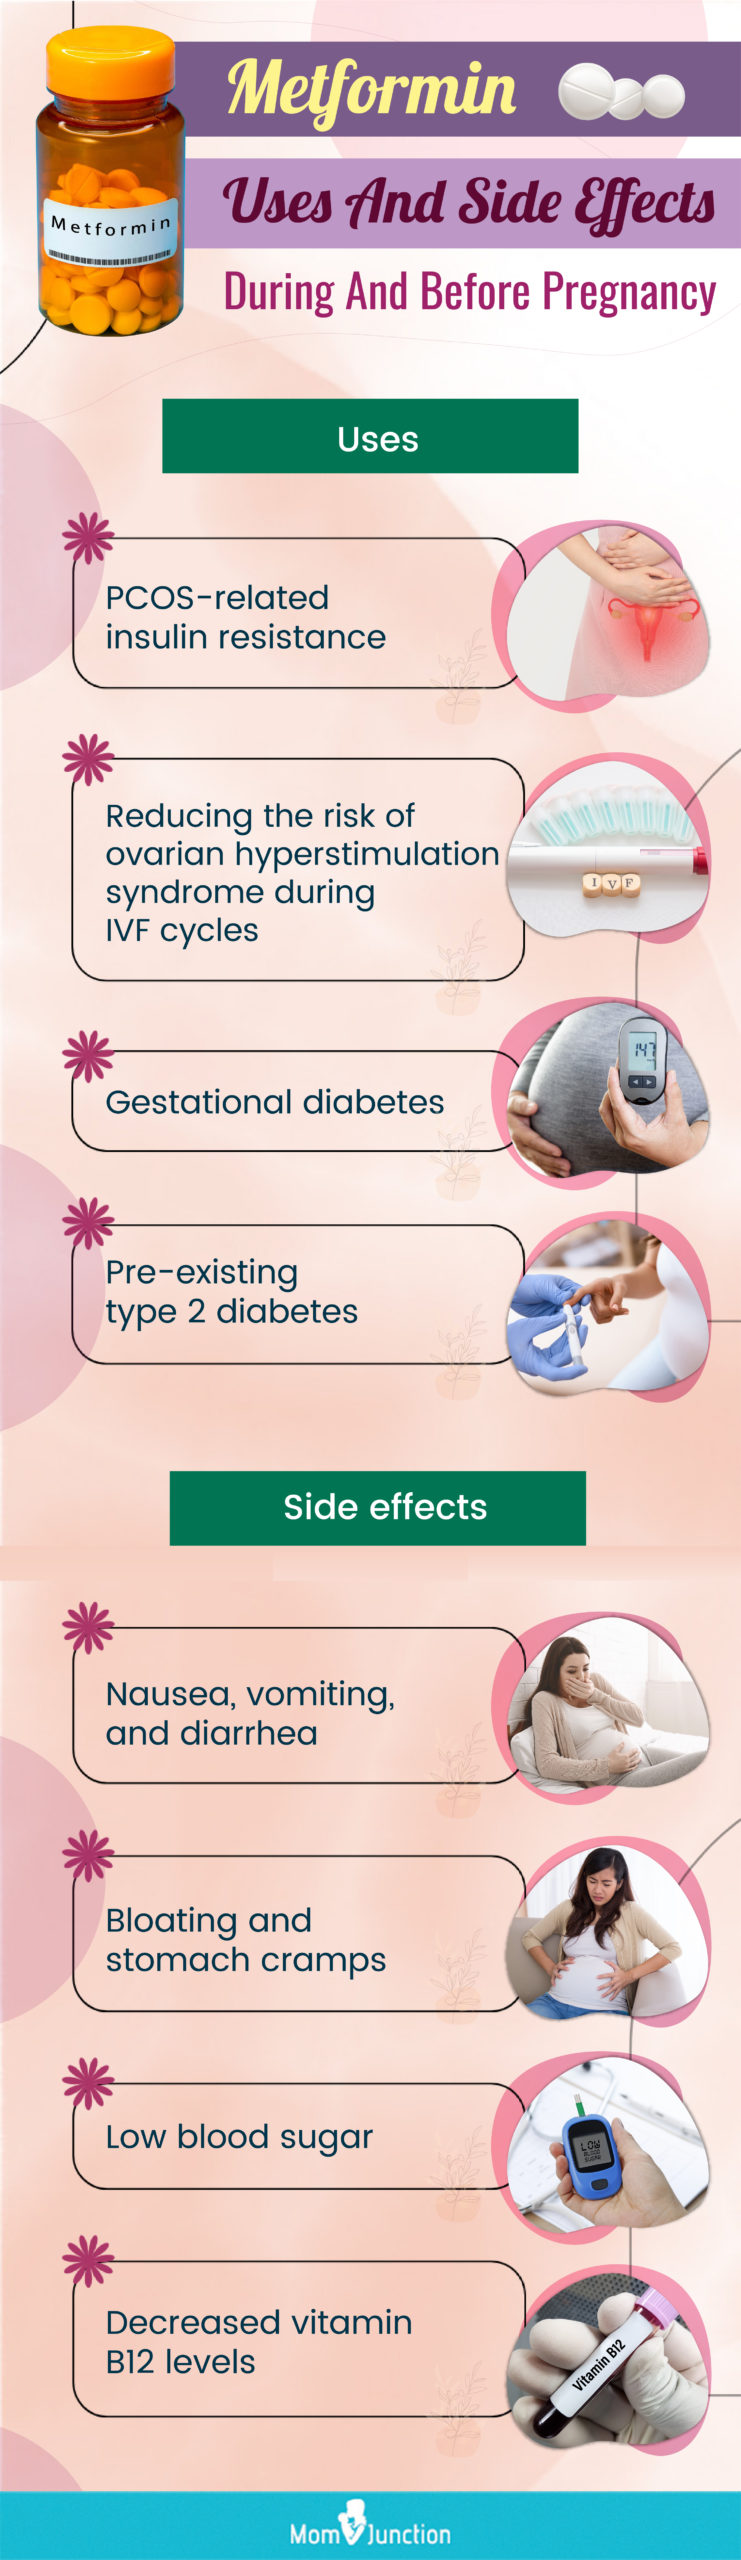 metformin uses and side effects during and before pregnancy (infographic)